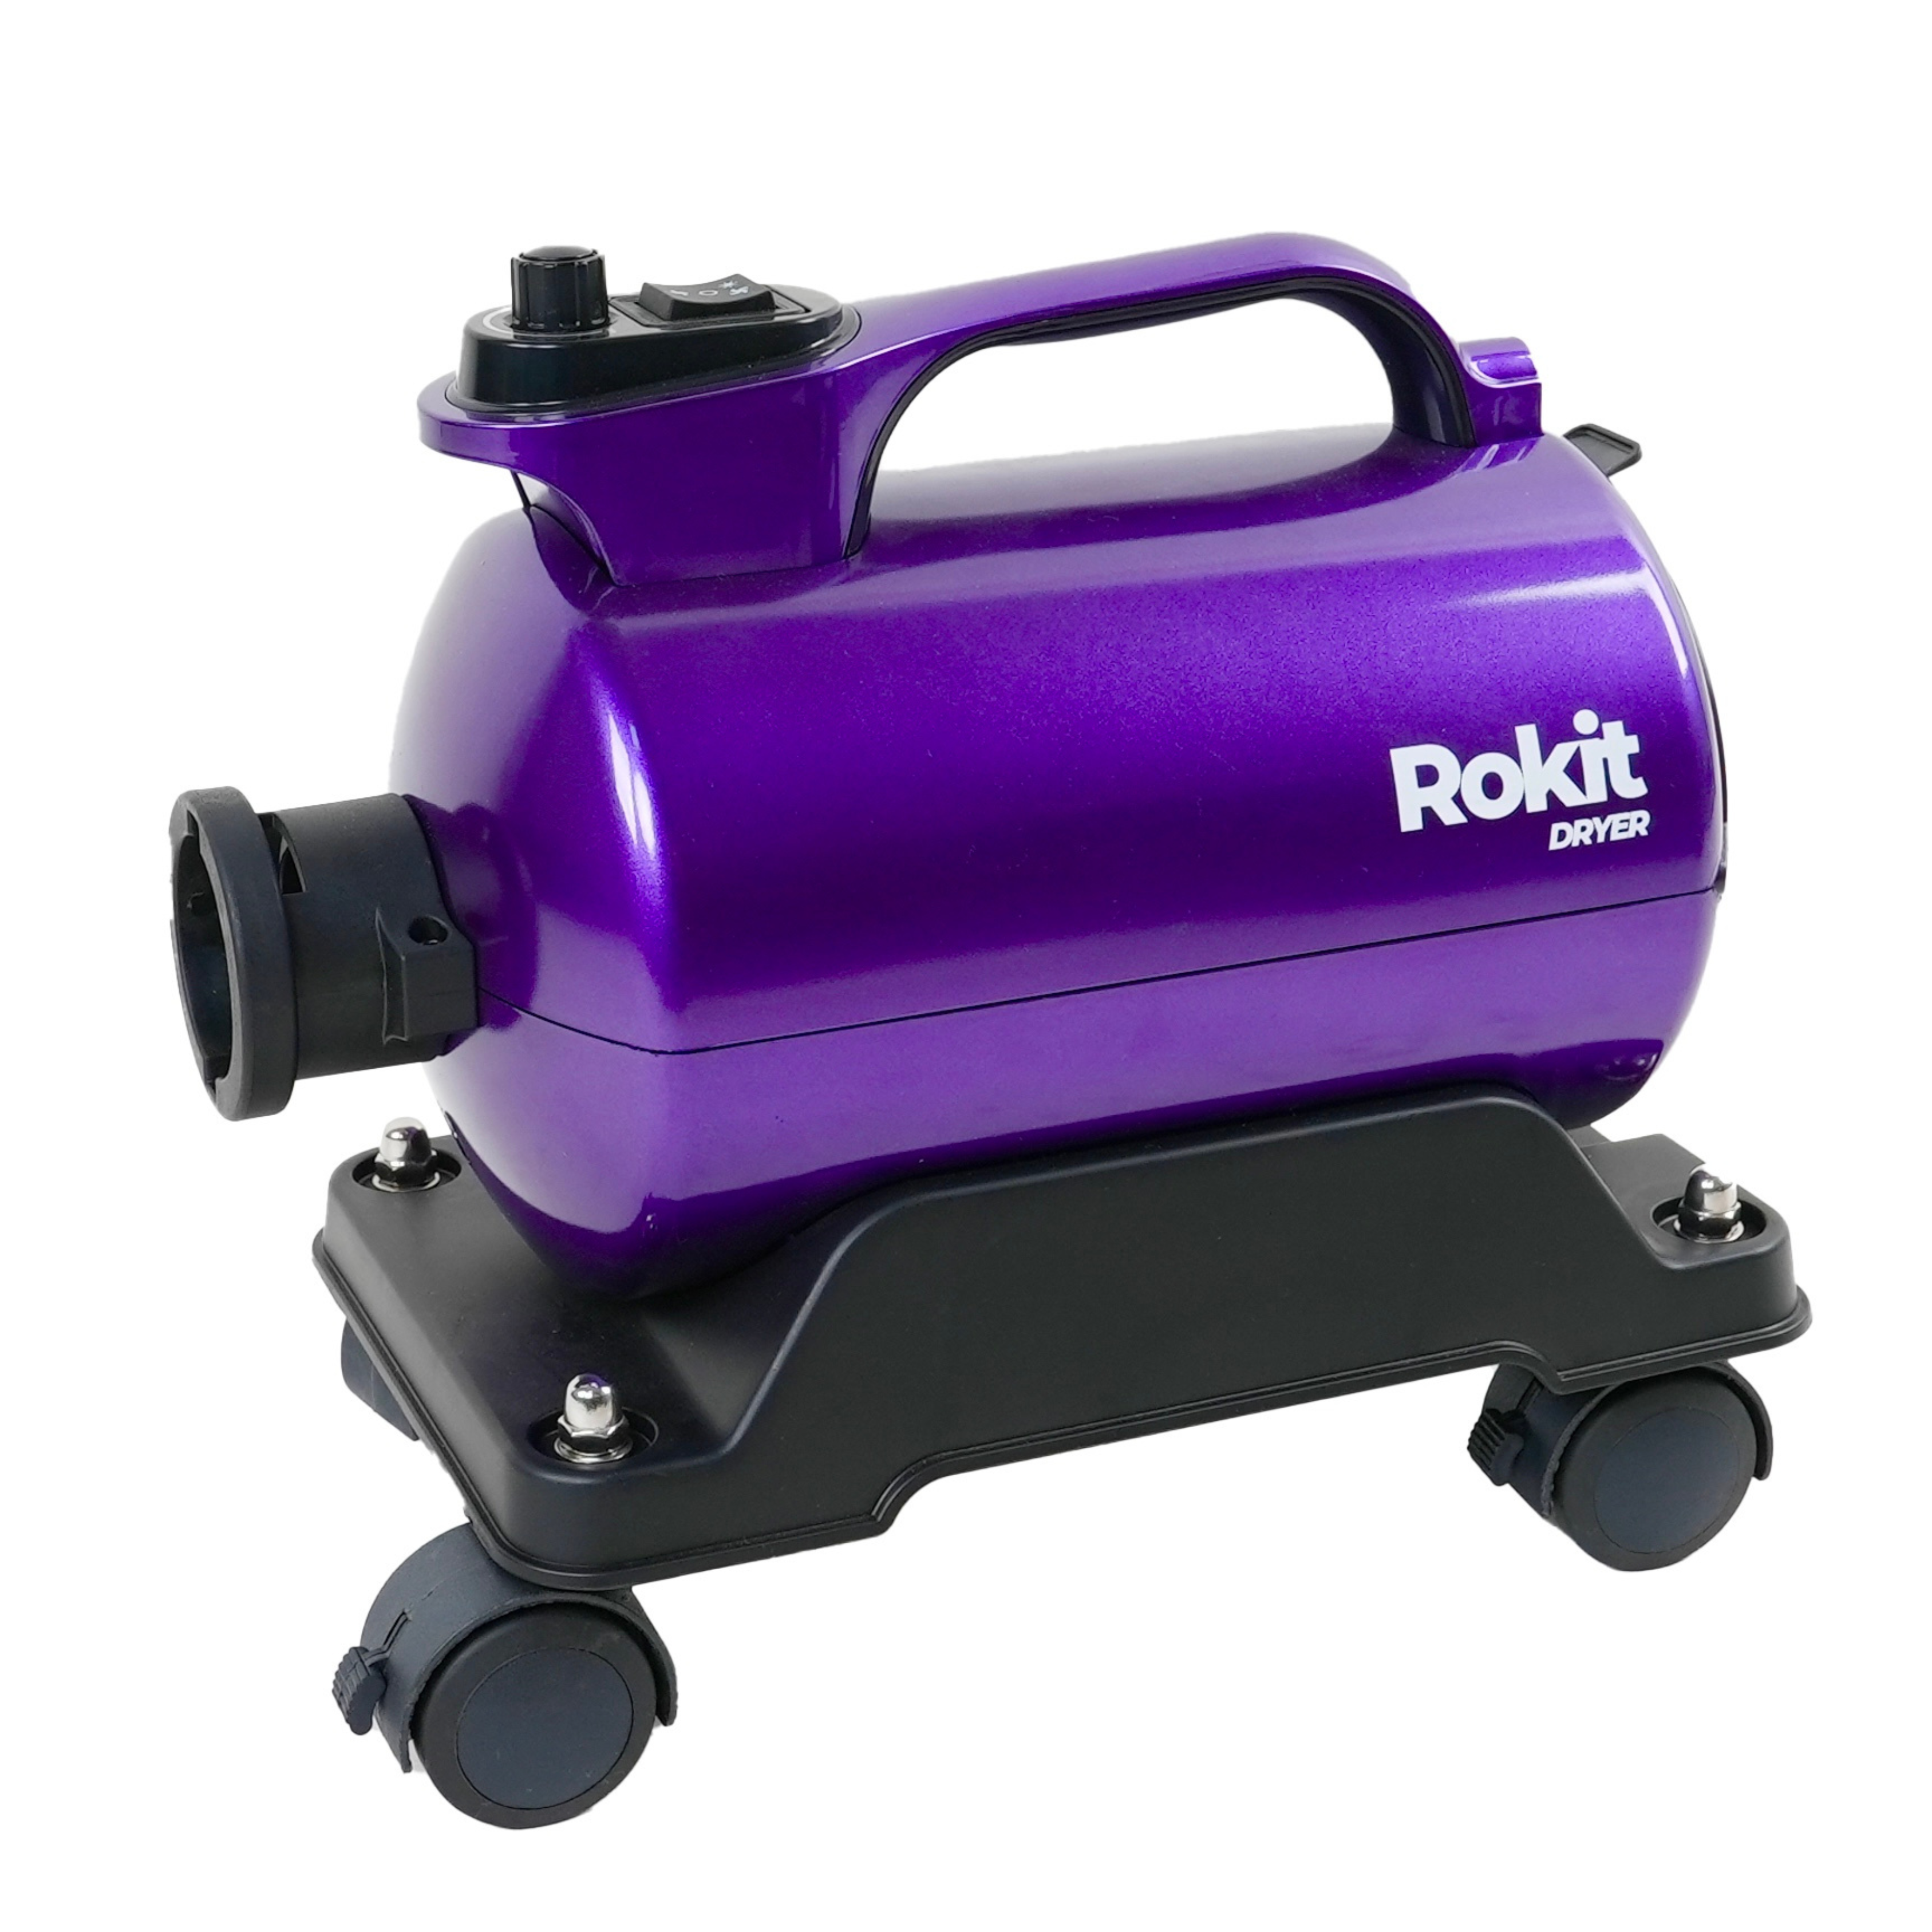 Rokit Resolution 1 (R1) Car Dryer / Forced Air Vehicle Dryer